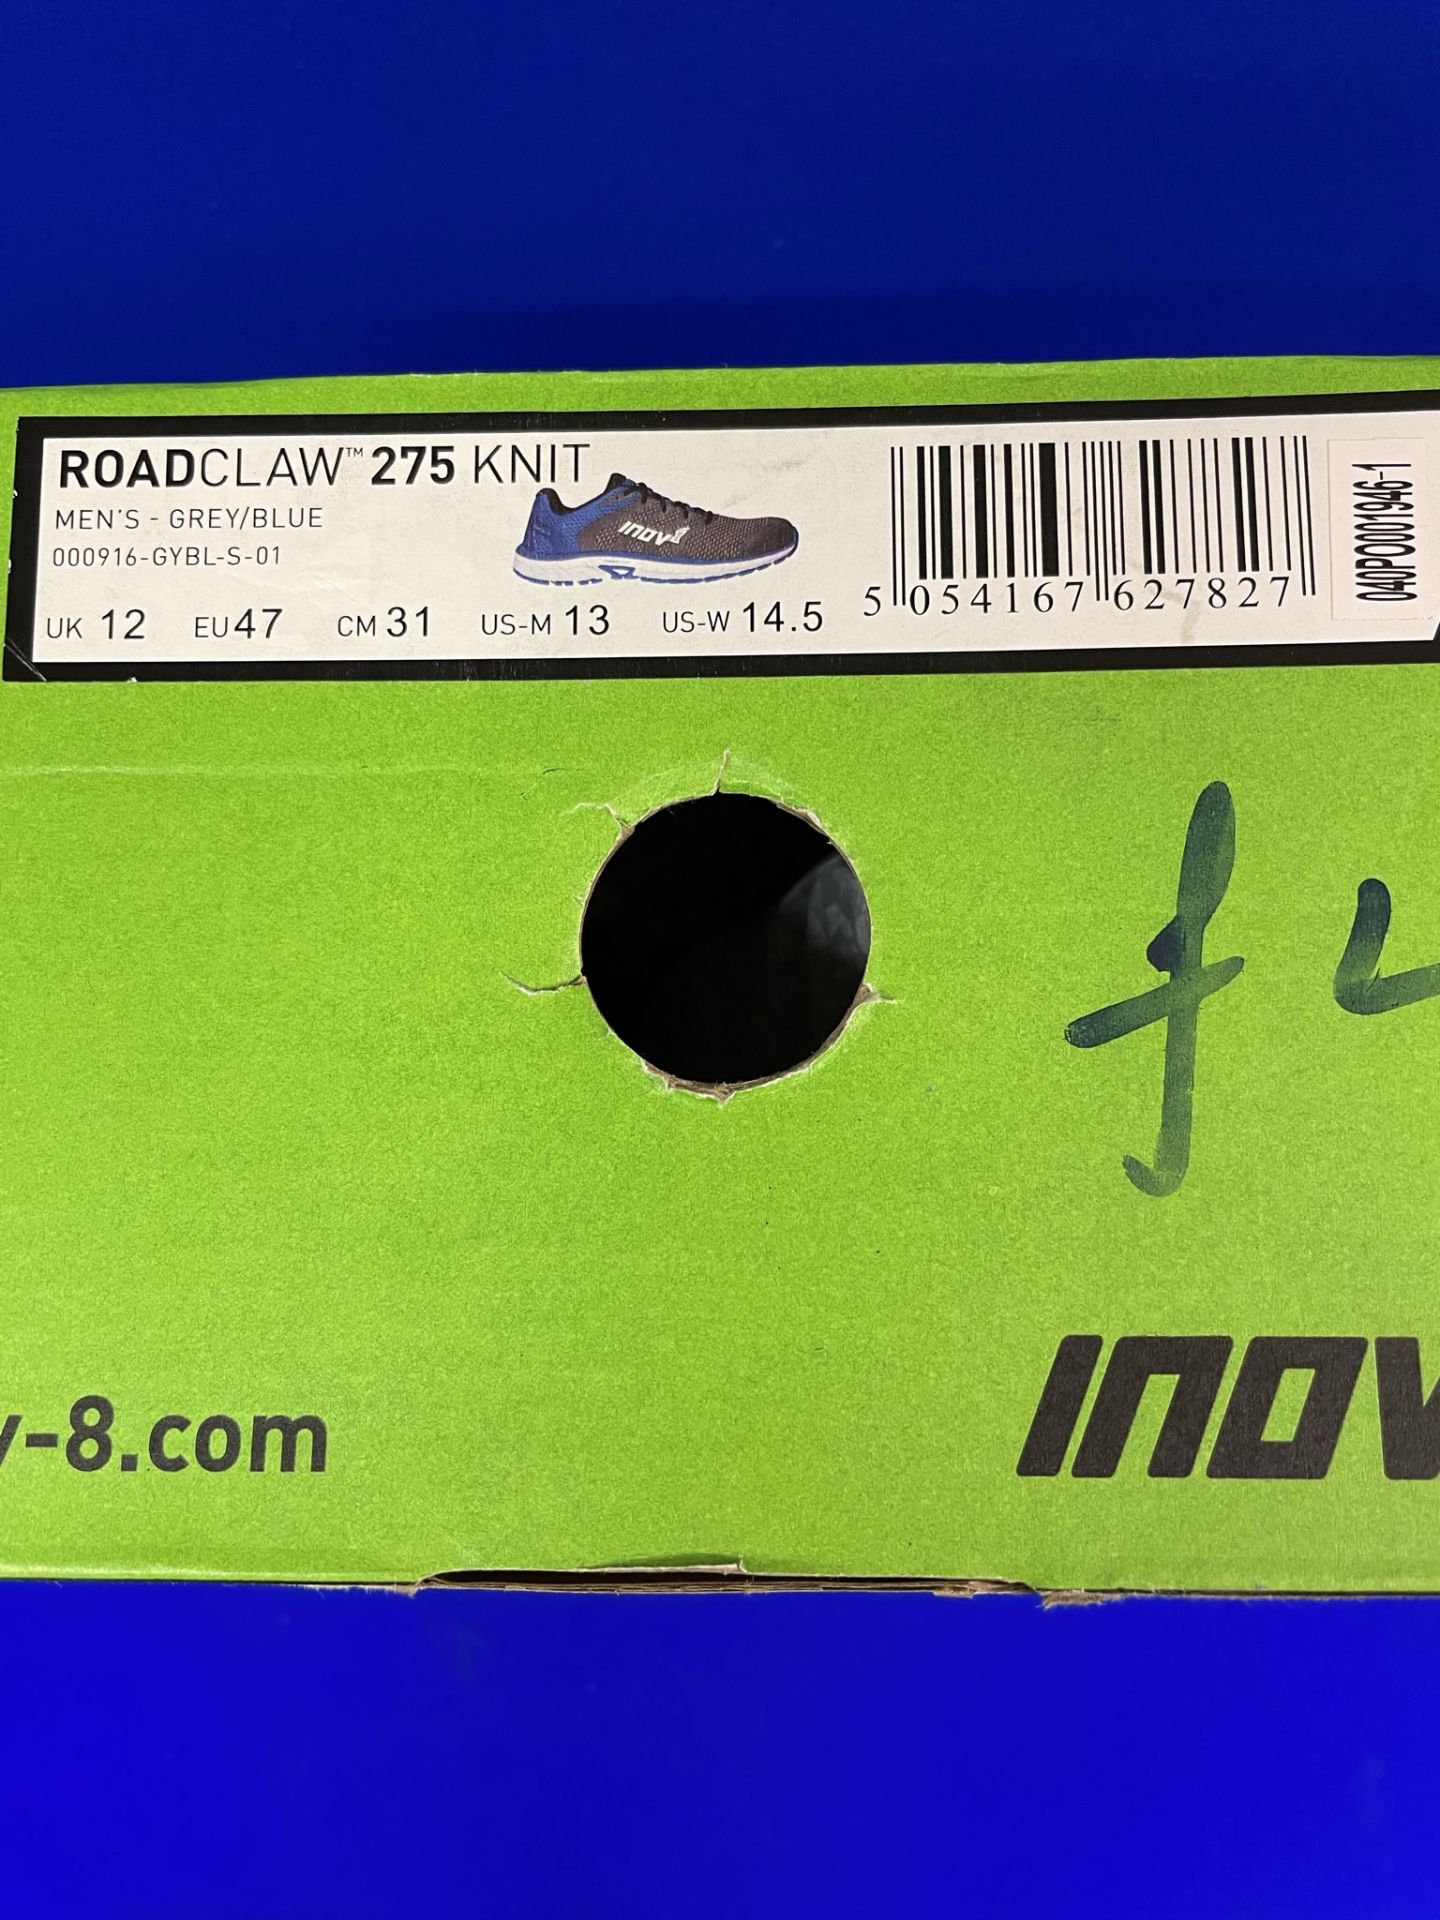 Inov-8 Roadclaw Men's Trainers | UK 12 - Image 4 of 4